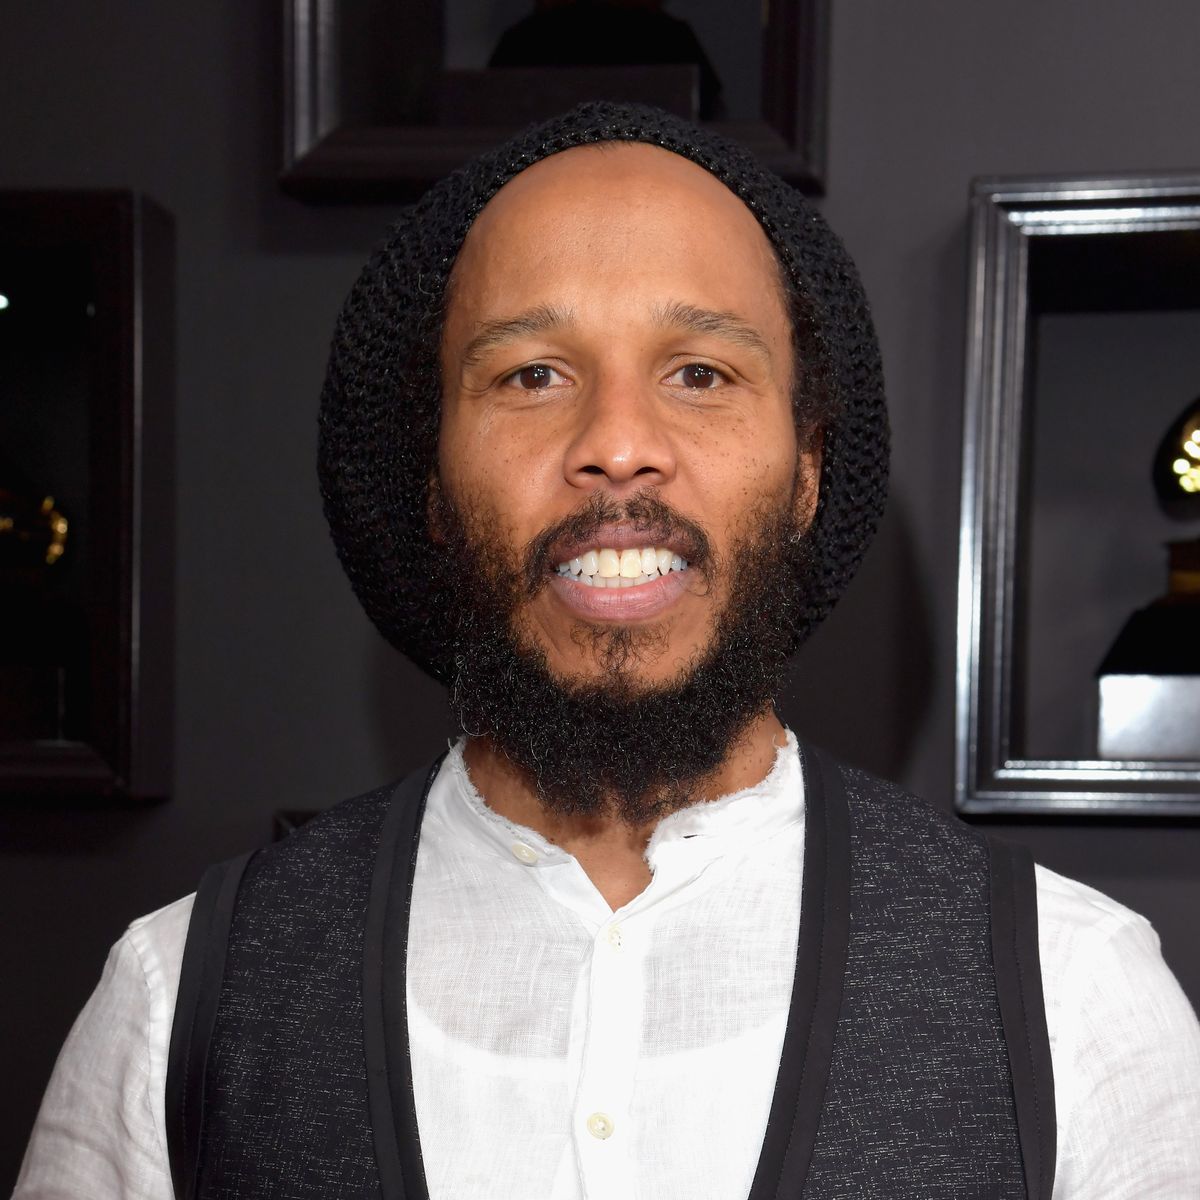 59th GRAMMY Awards - Red CarpetLOS ANGELES, CA - FEBRUARY 12: Musician Ziggy Marley attends The 59th GRAMMY Awards at STAPLES Center on February 12, 2017 in Los Angeles, California. (Photo by Lester Cohen/WireImage)